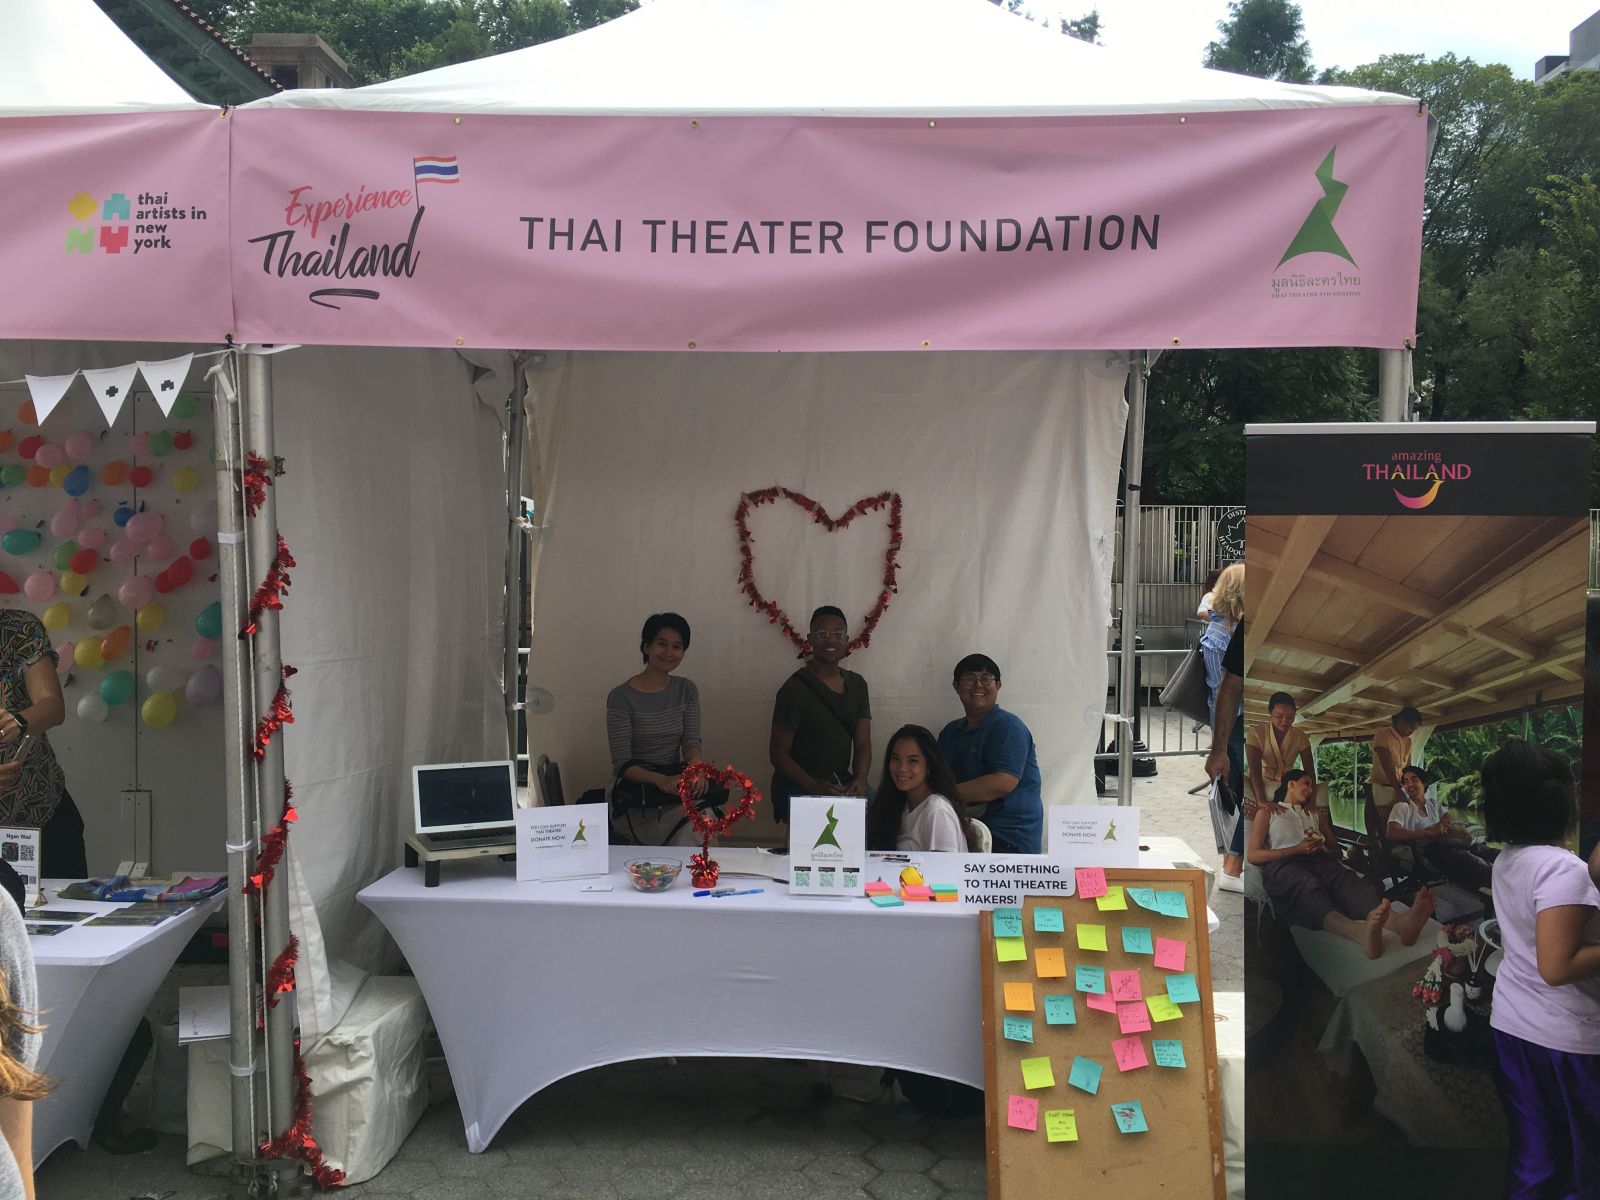 Taking Thailand to the stage The Thai Theatre Foundation aims to breathe new life into the Kingdom’s lively but underfunded theatrical community